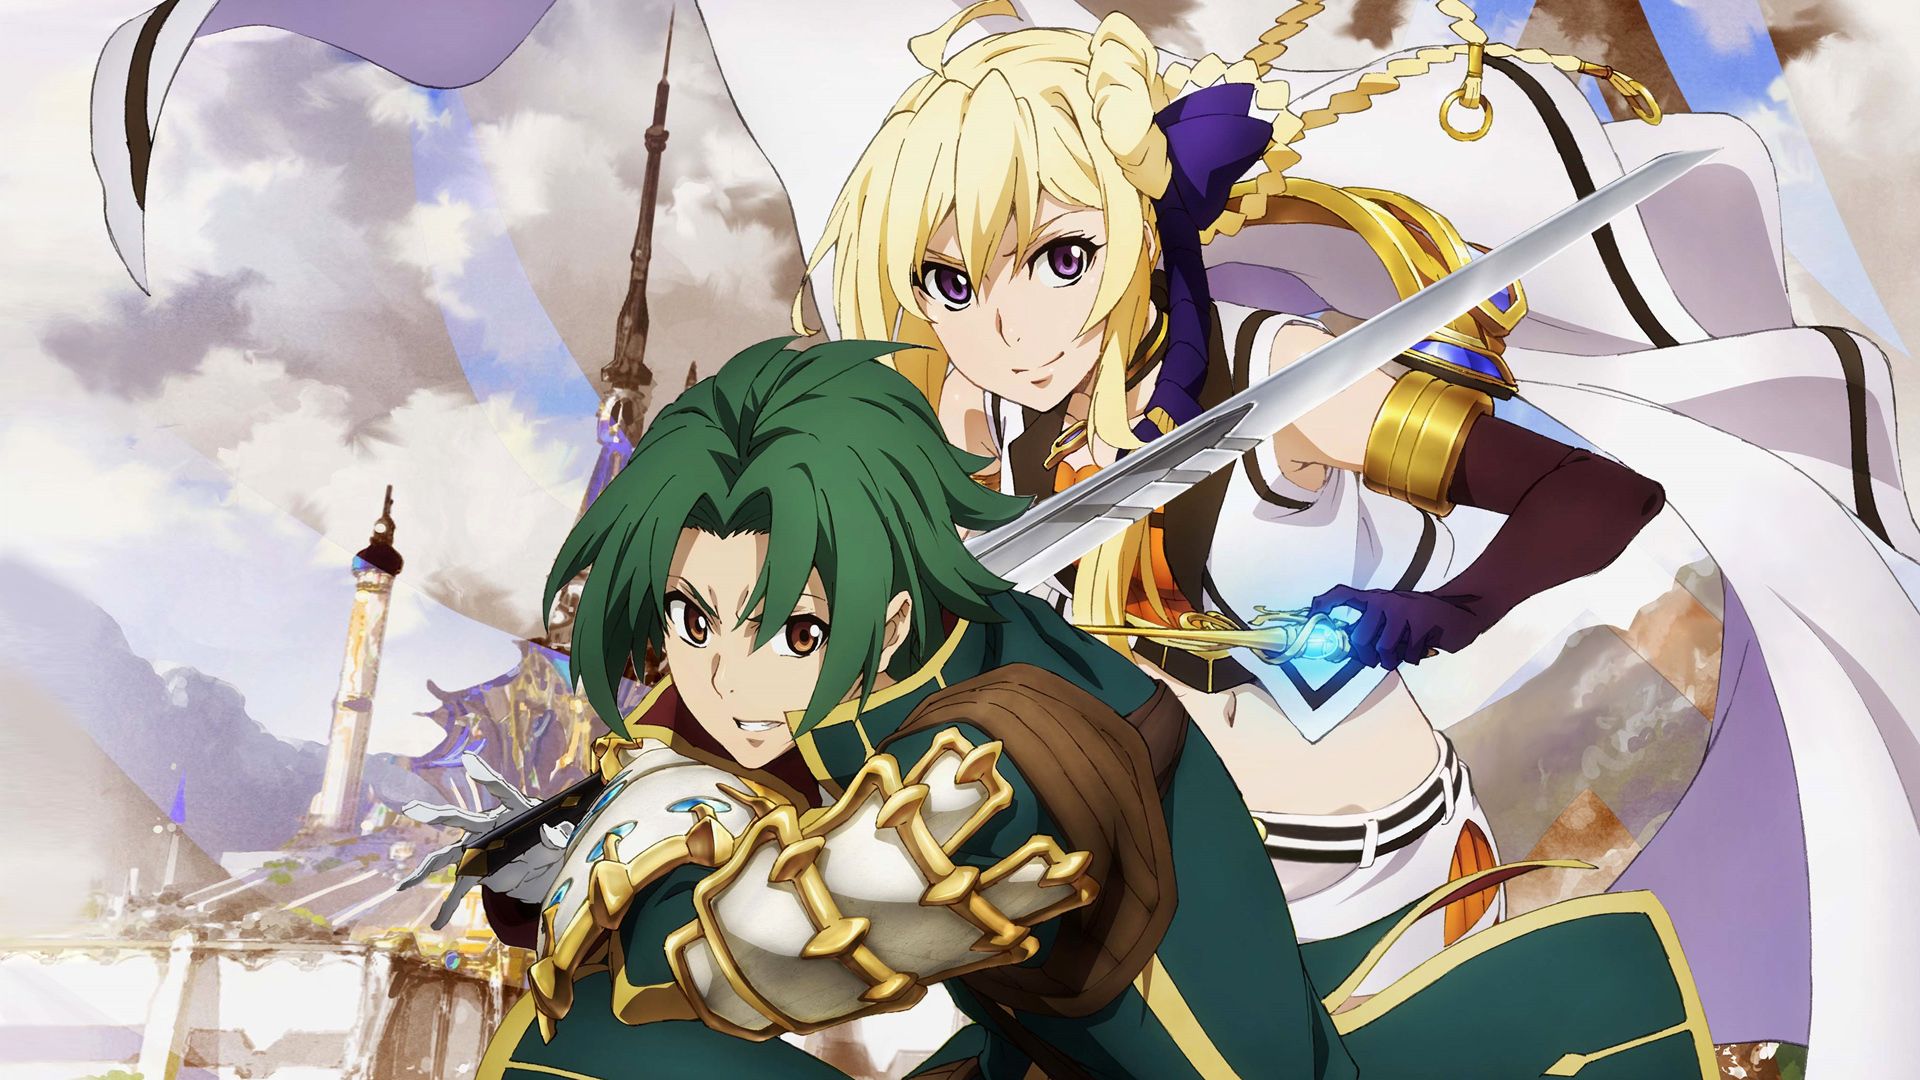 Record of Grancrest War background